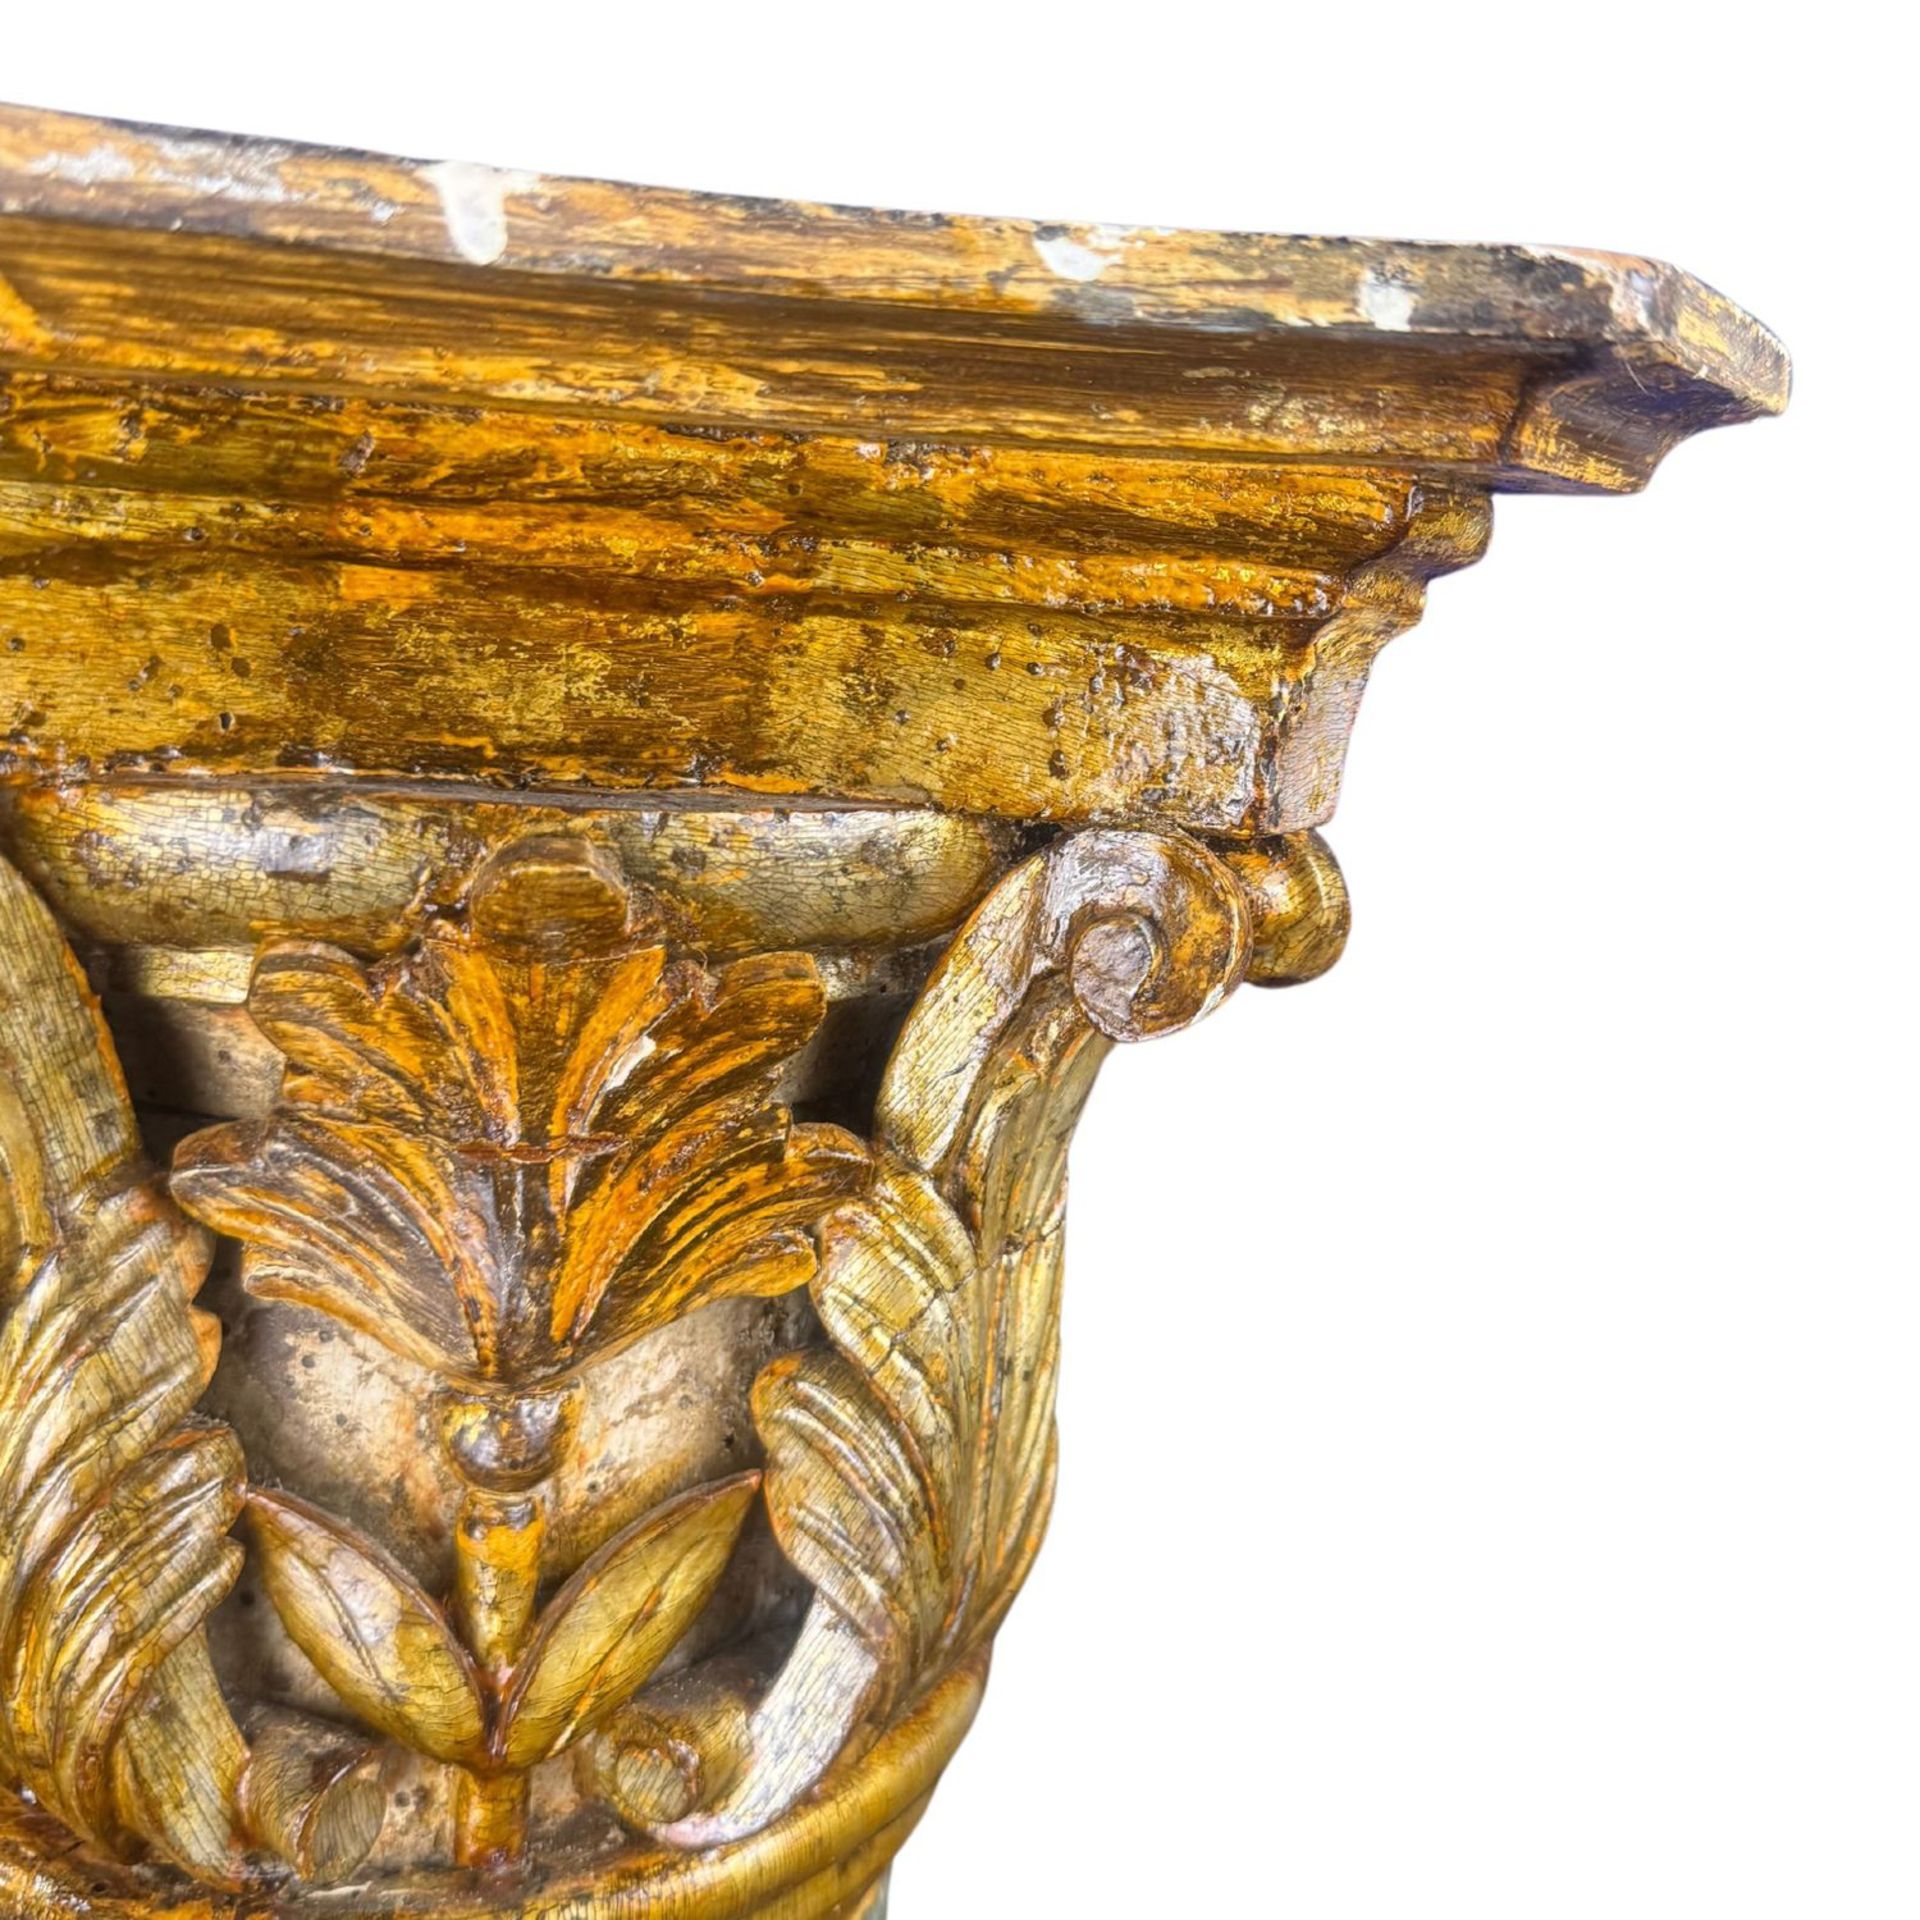 Carved wooden column with lacquer and gold finish - Image 3 of 7